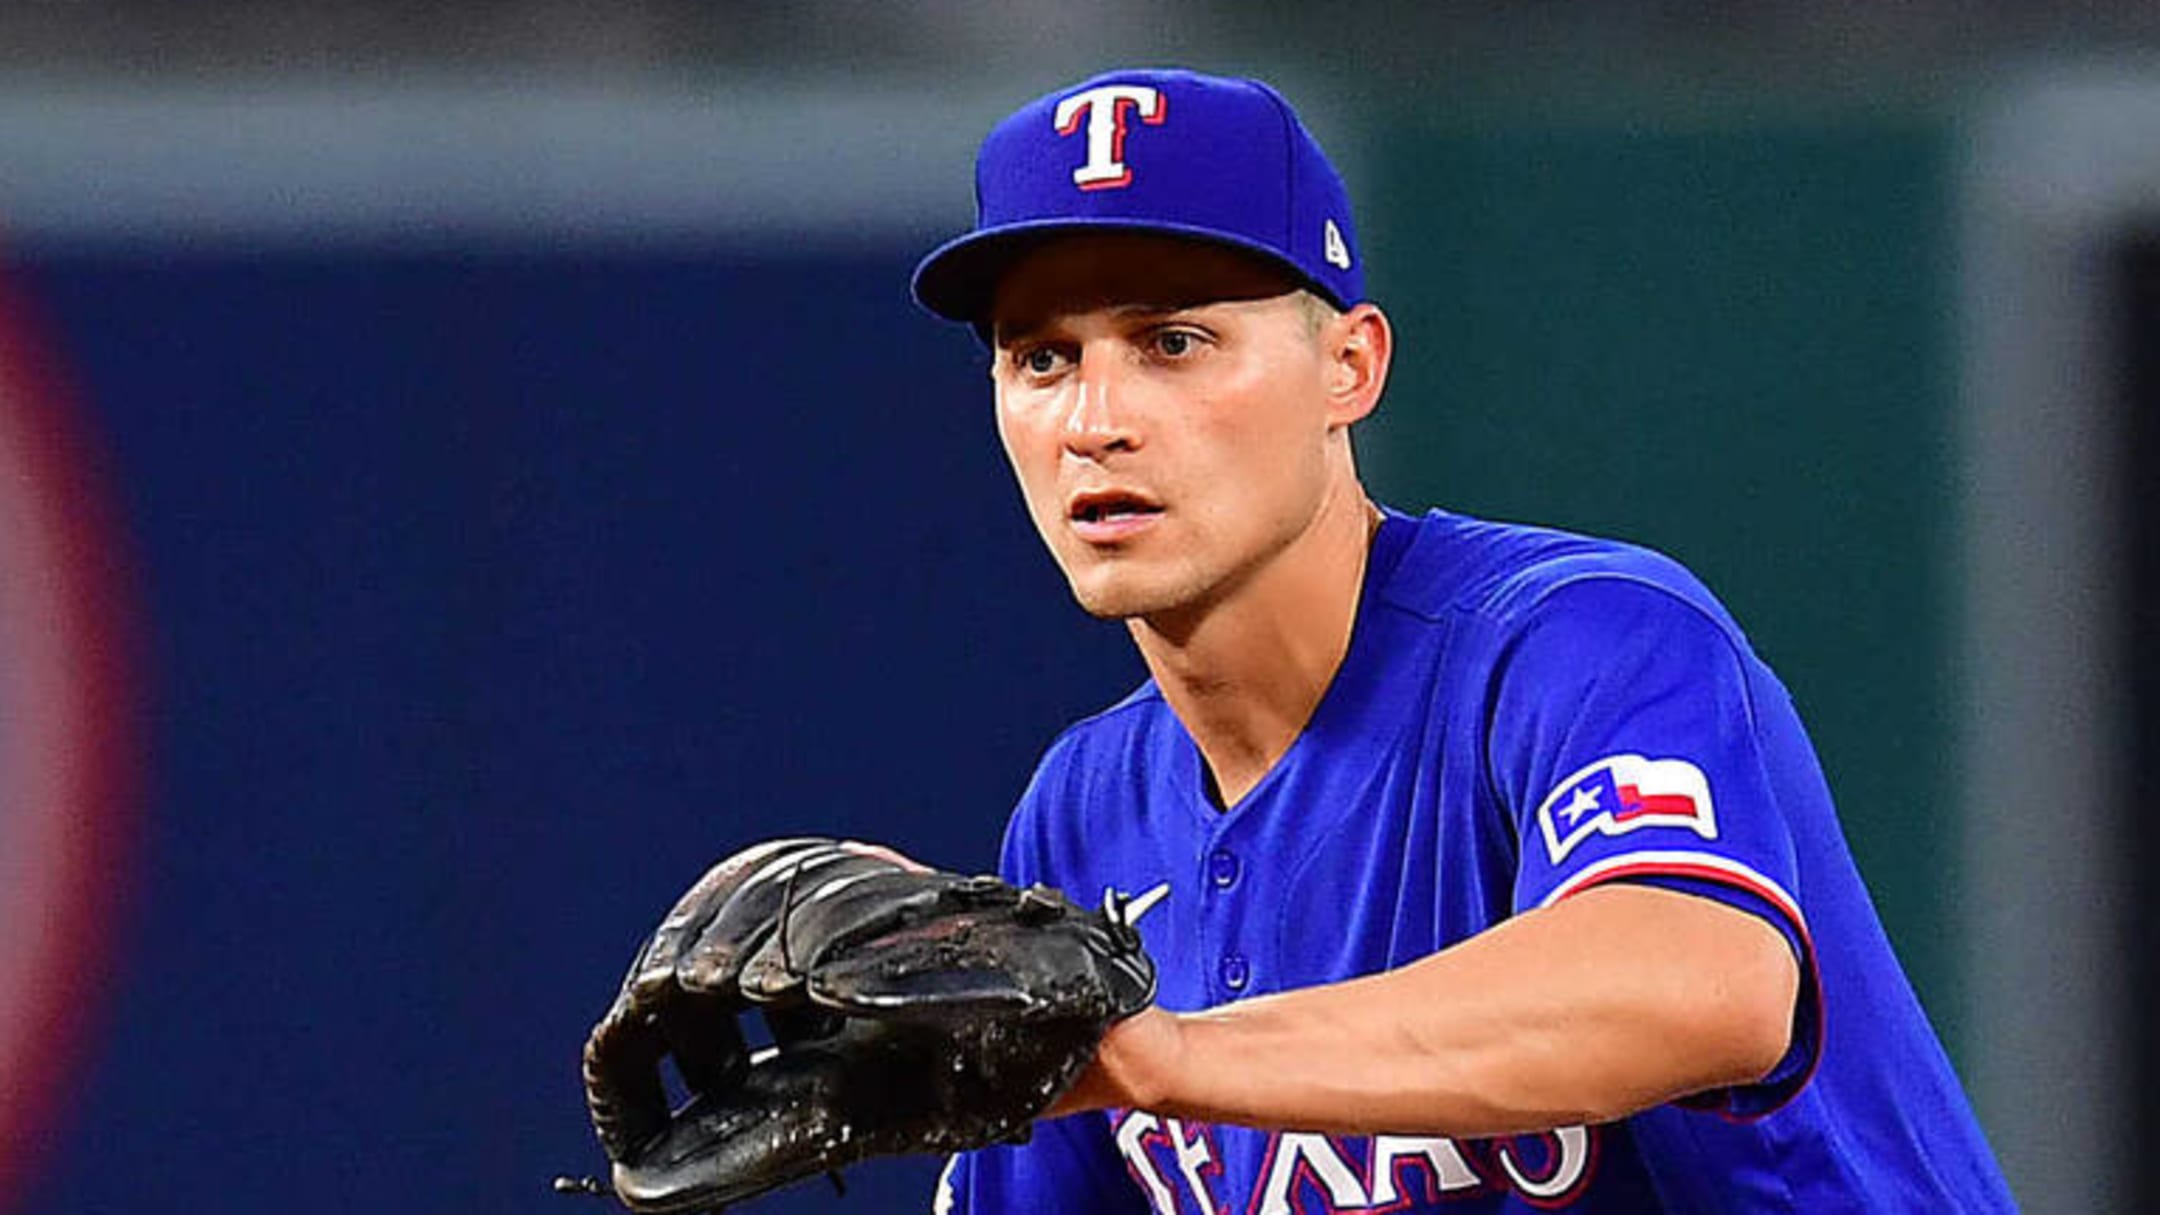 It took over 150 games, but Rangers SS Corey Seager has finally